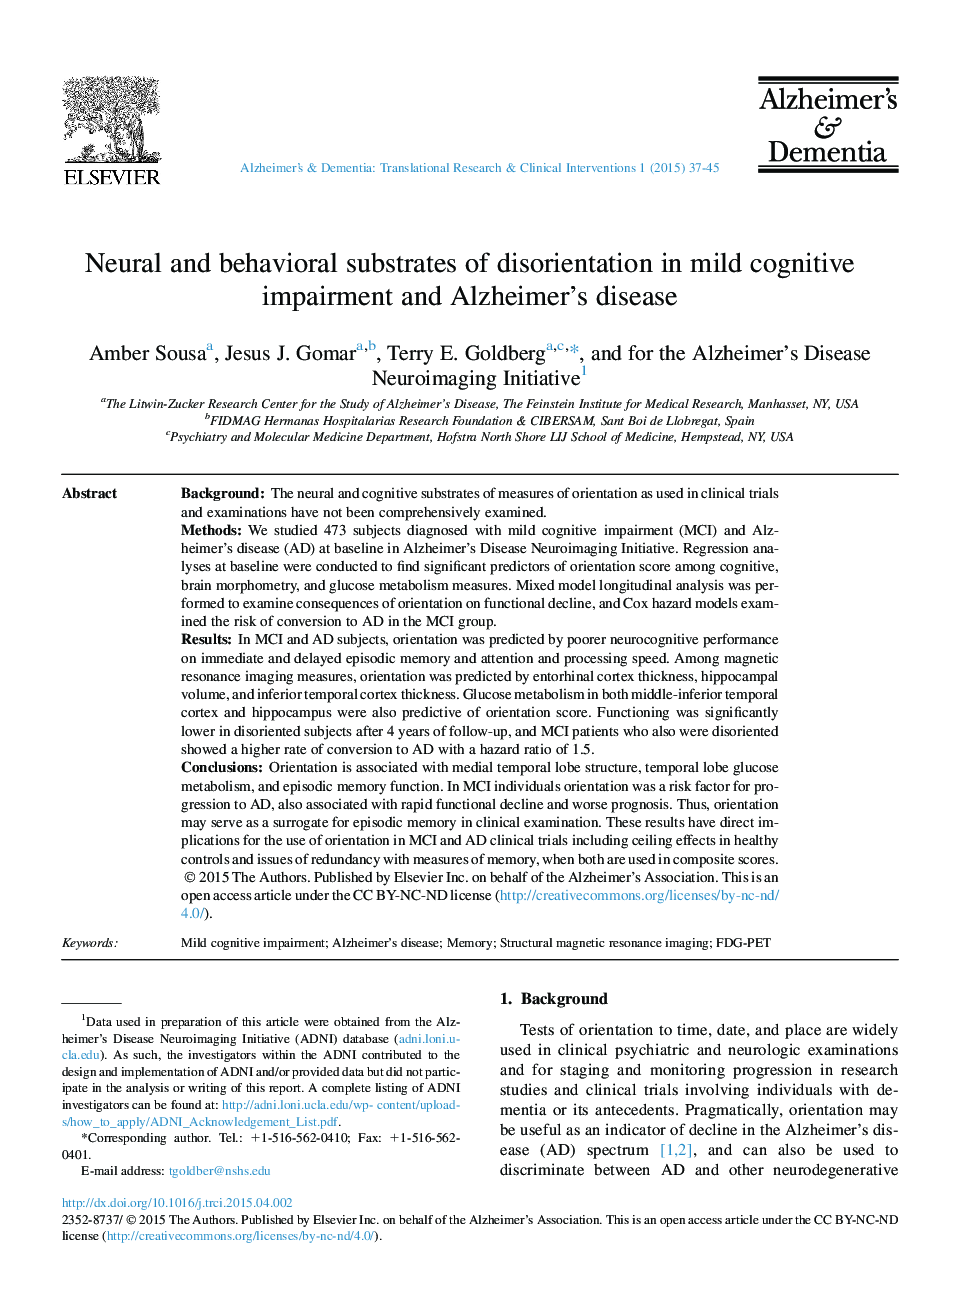 Neural and behavioral substrates of disorientation in mild cognitive impairment and Alzheimer's disease